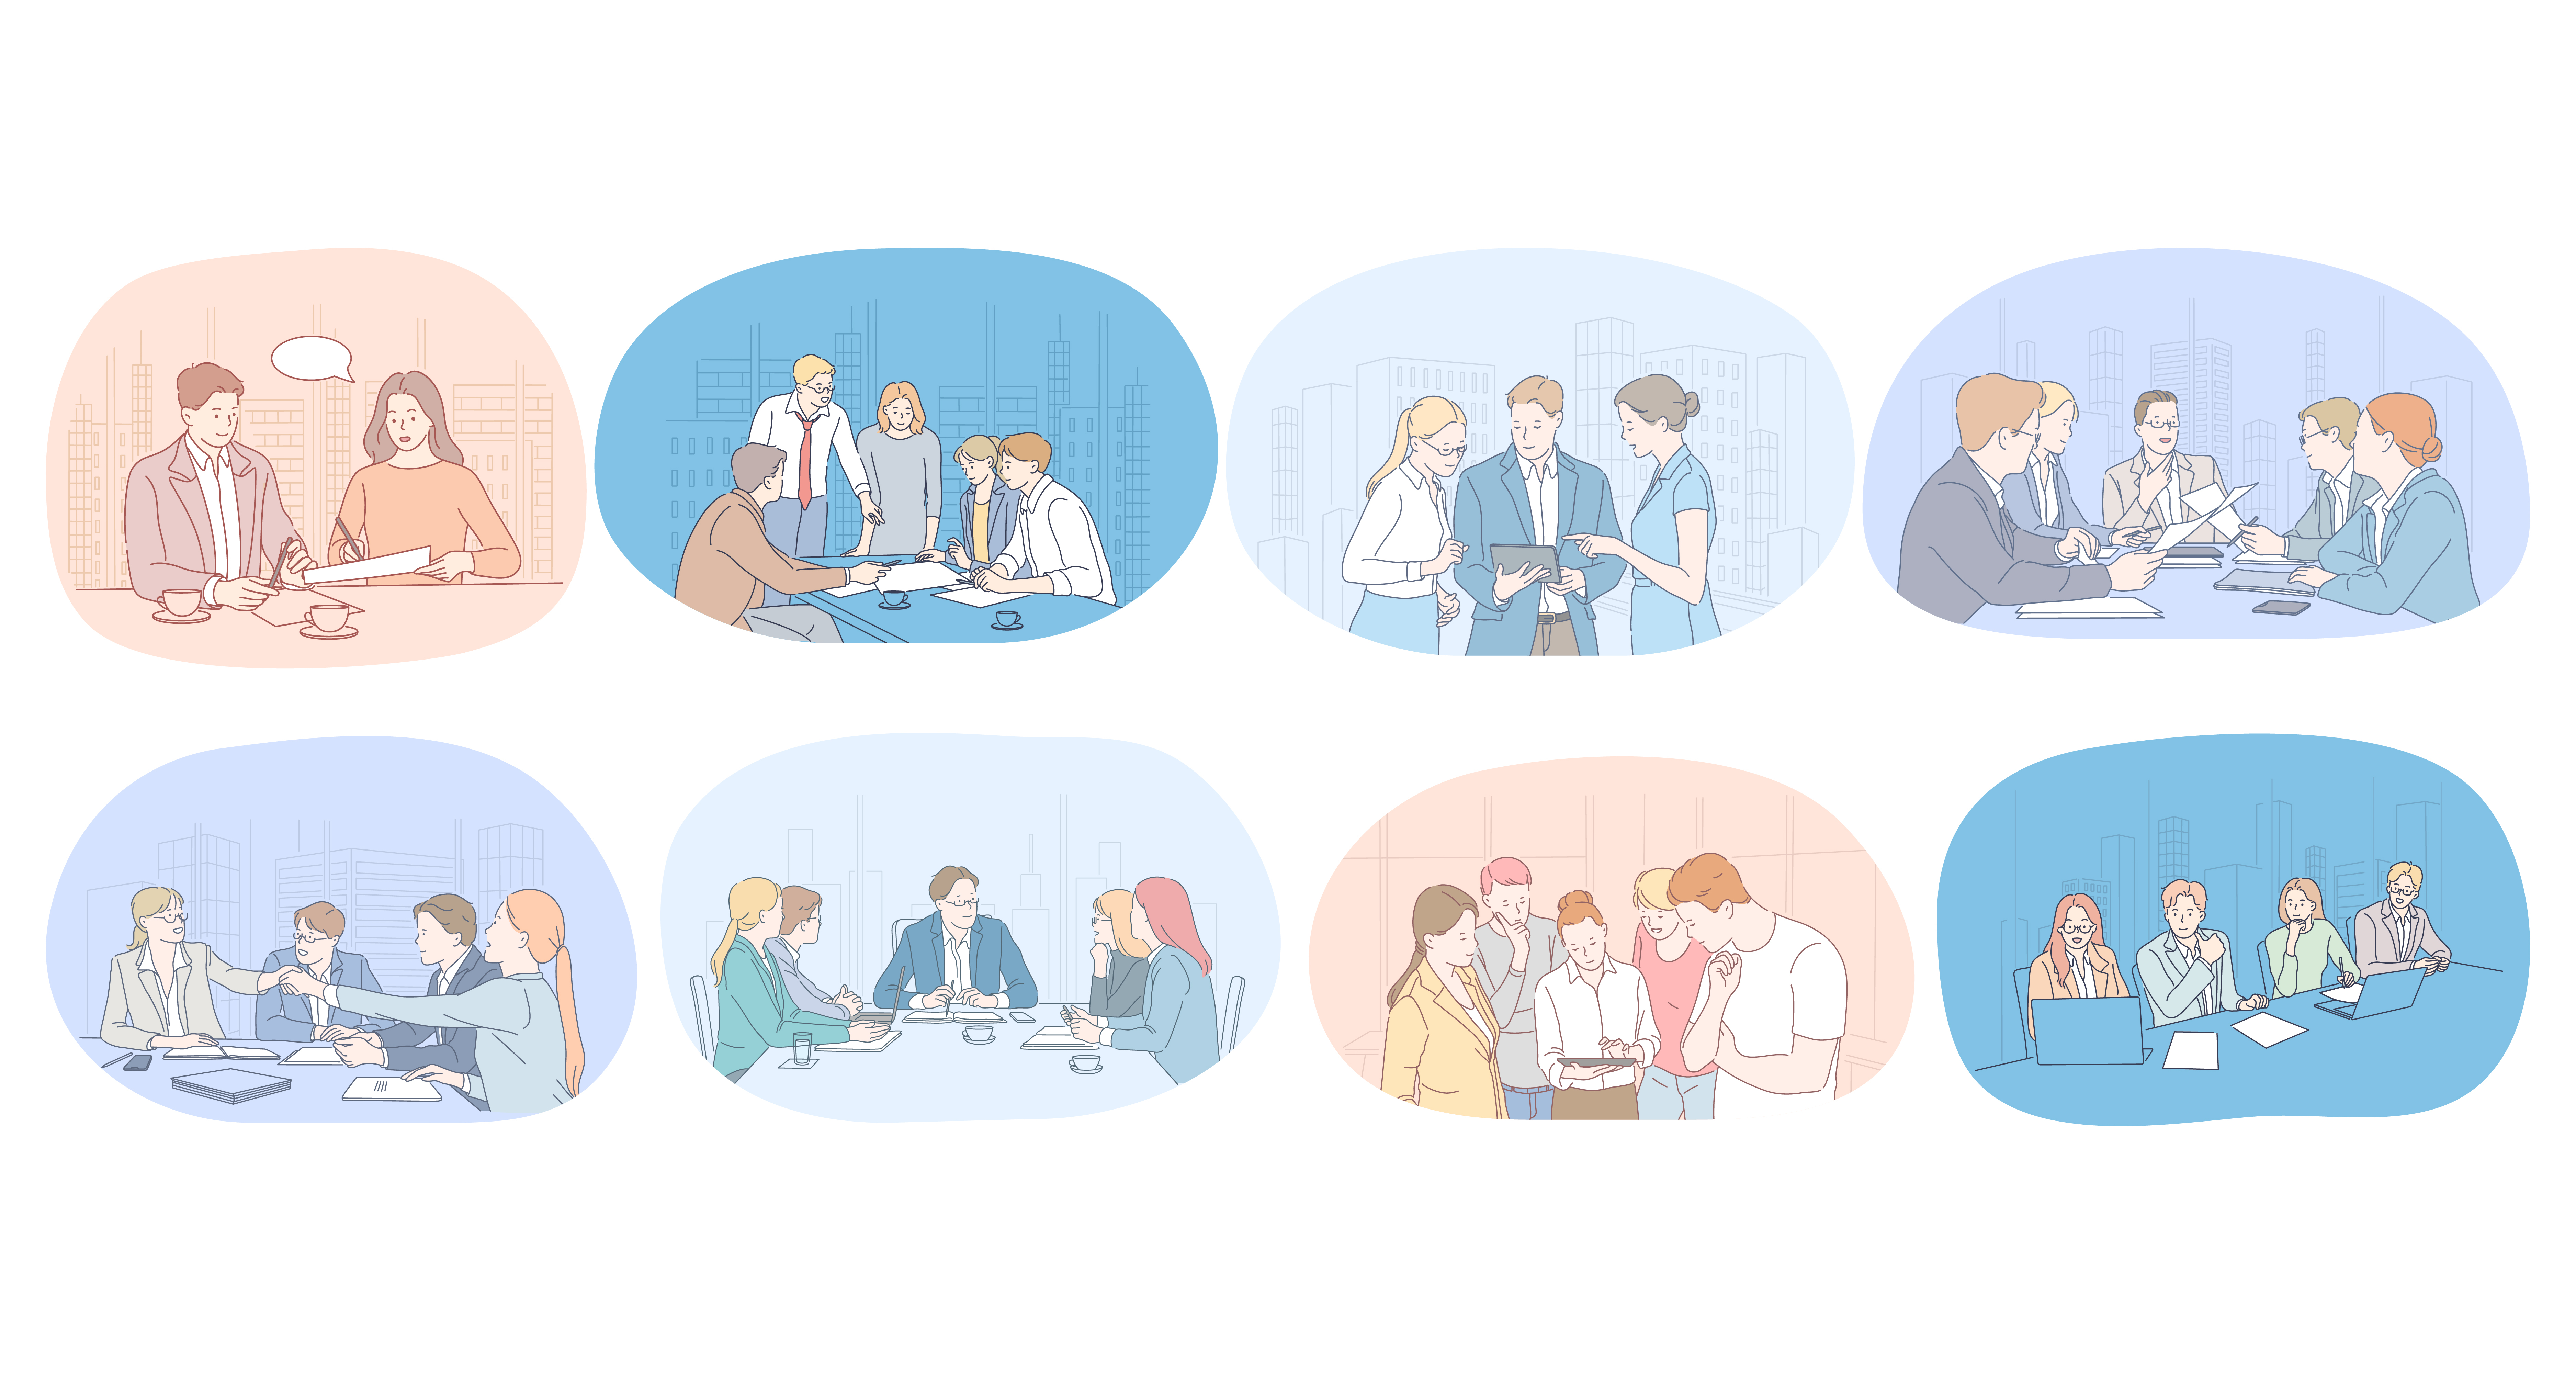 Communication, business, teamwork, brainstorming, presentation, agreement concept. Business people partners coworkers cartoon characters discussing projects, having brainstorming, negotiating . Communication, business, teamwork, brainstorming, presentation, agreement concept